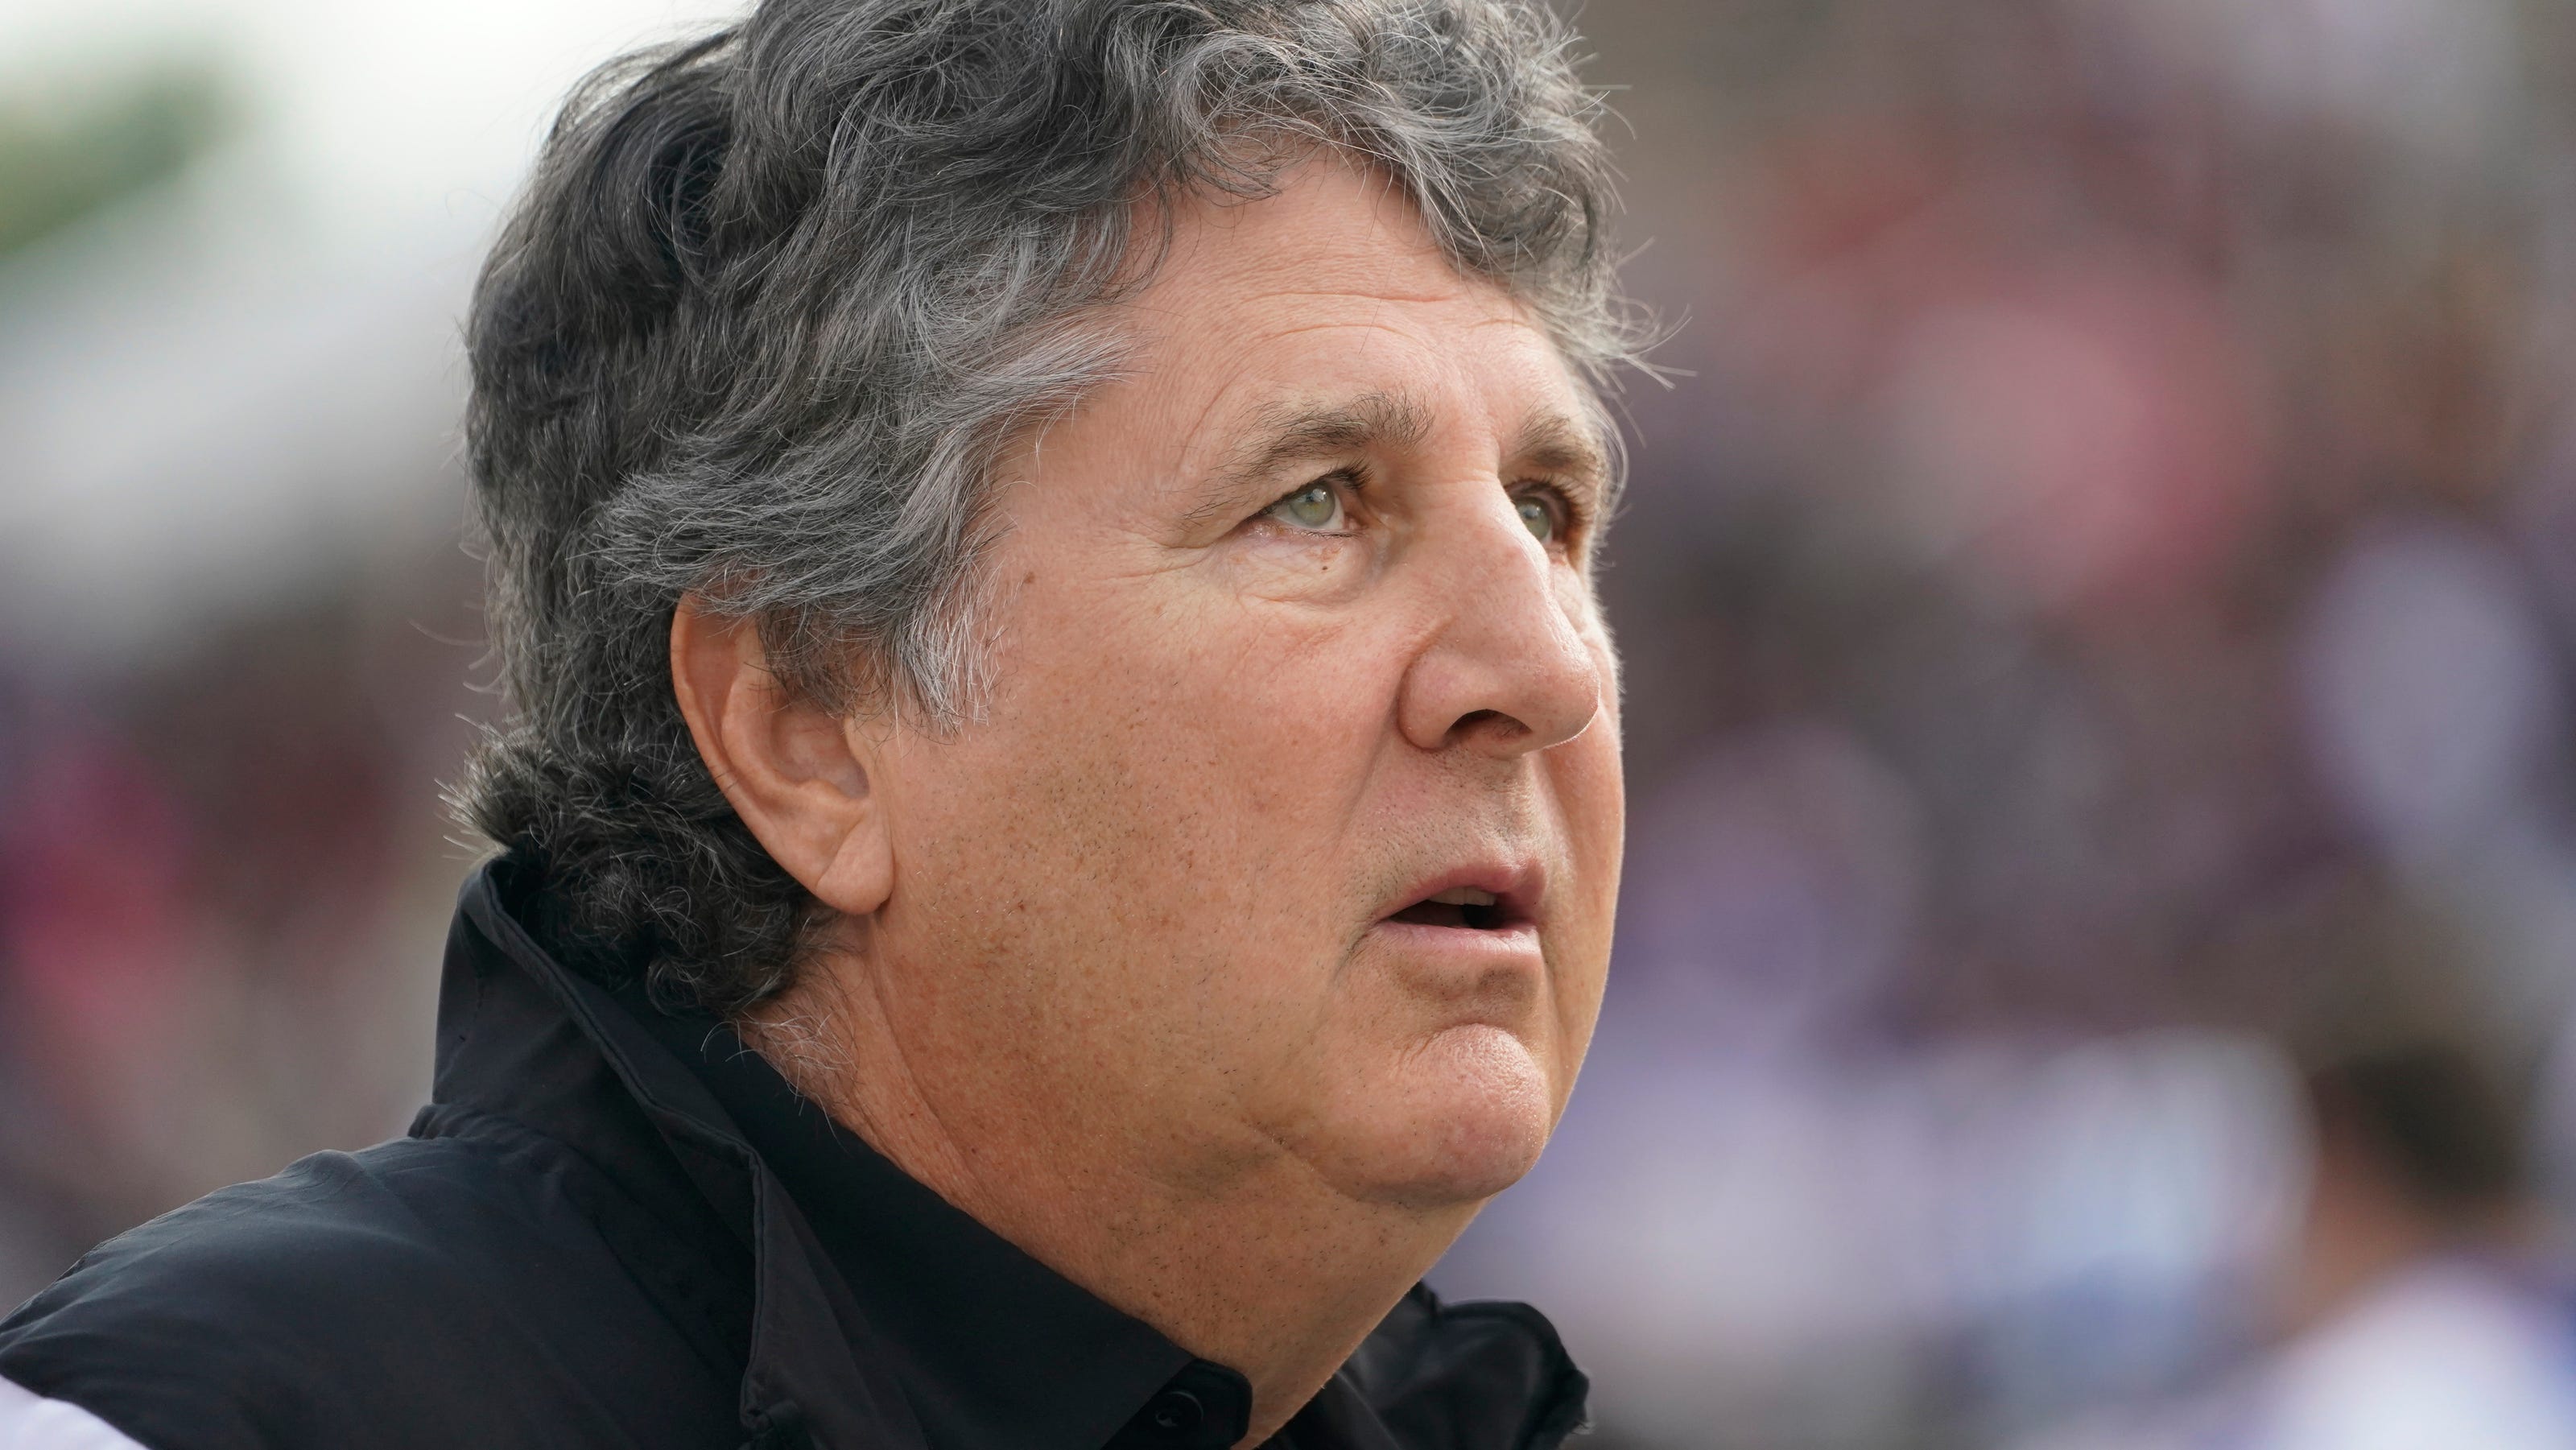 Mike Leach dies at 61. Mississippi State coach suffered heart attack